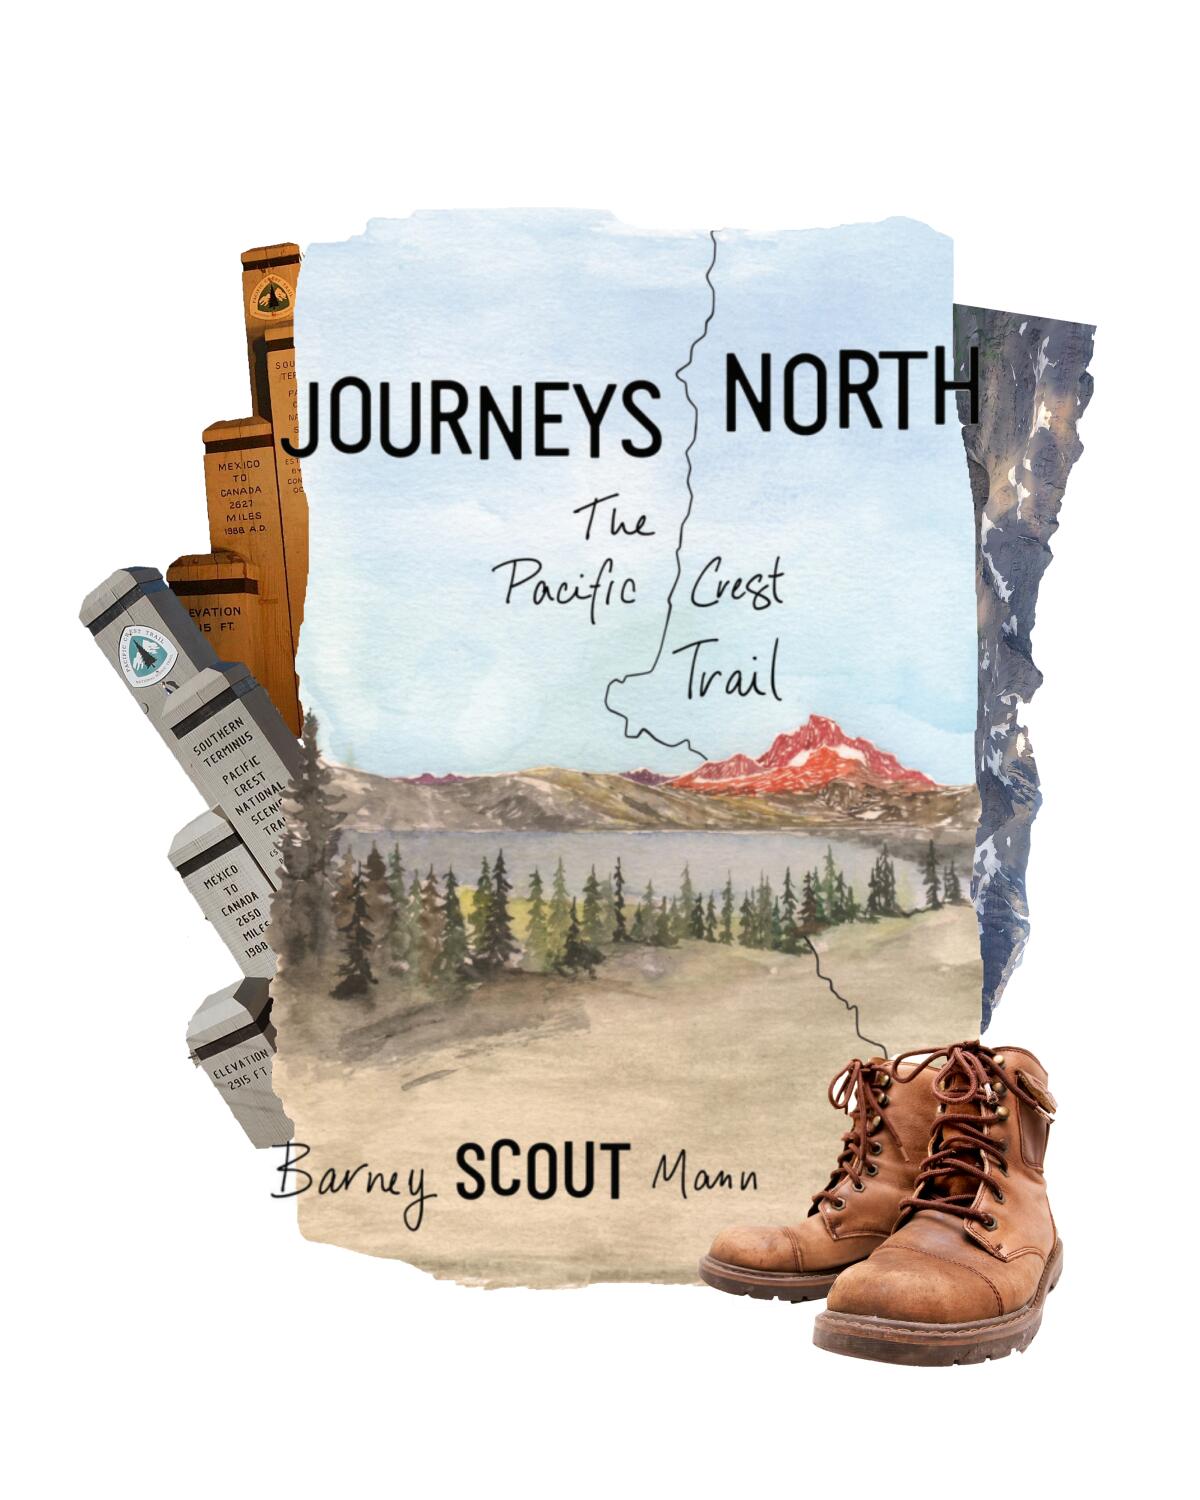 Book cover for "Journeys North" by Barney "Scout" Mann.